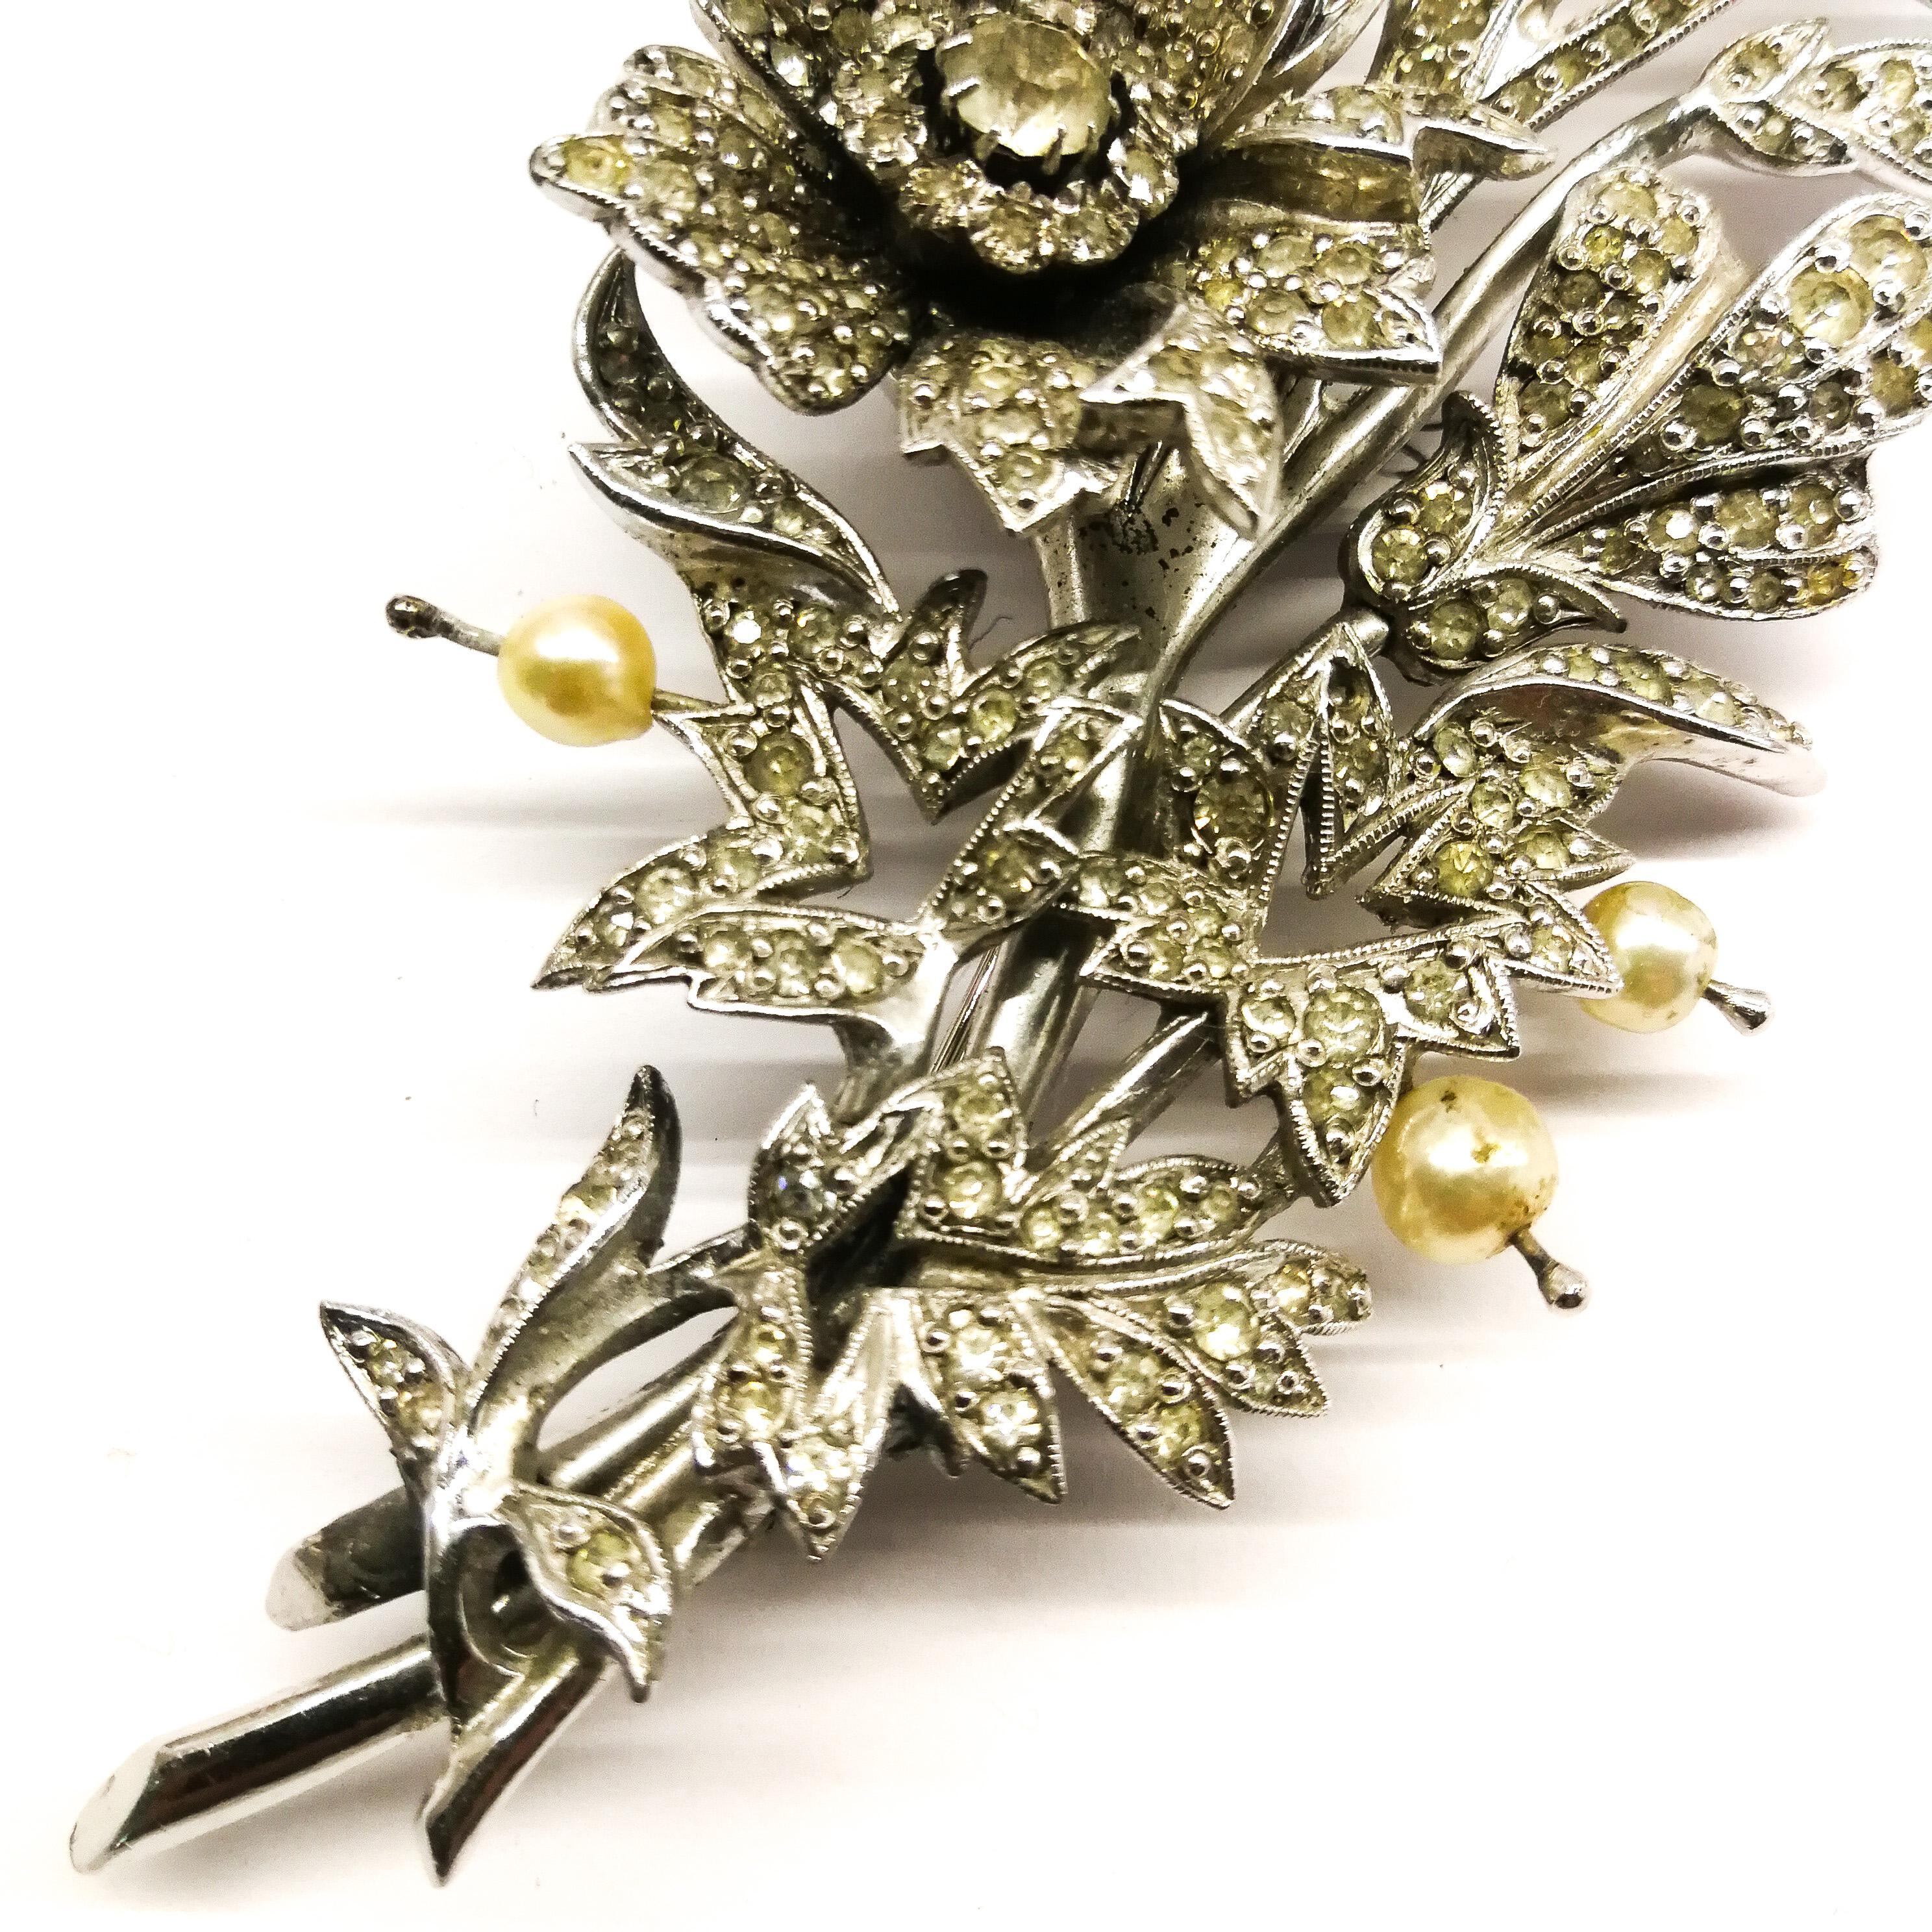 A very rare and elegant brooch from Christian Dior, made by Mitchel Maer, depicting a rose 'en tremblant', a glorious spray, from the early 1950s. Made of clear paste set in rhodium metal, it is highlighted with baroque prong set paste pearls.